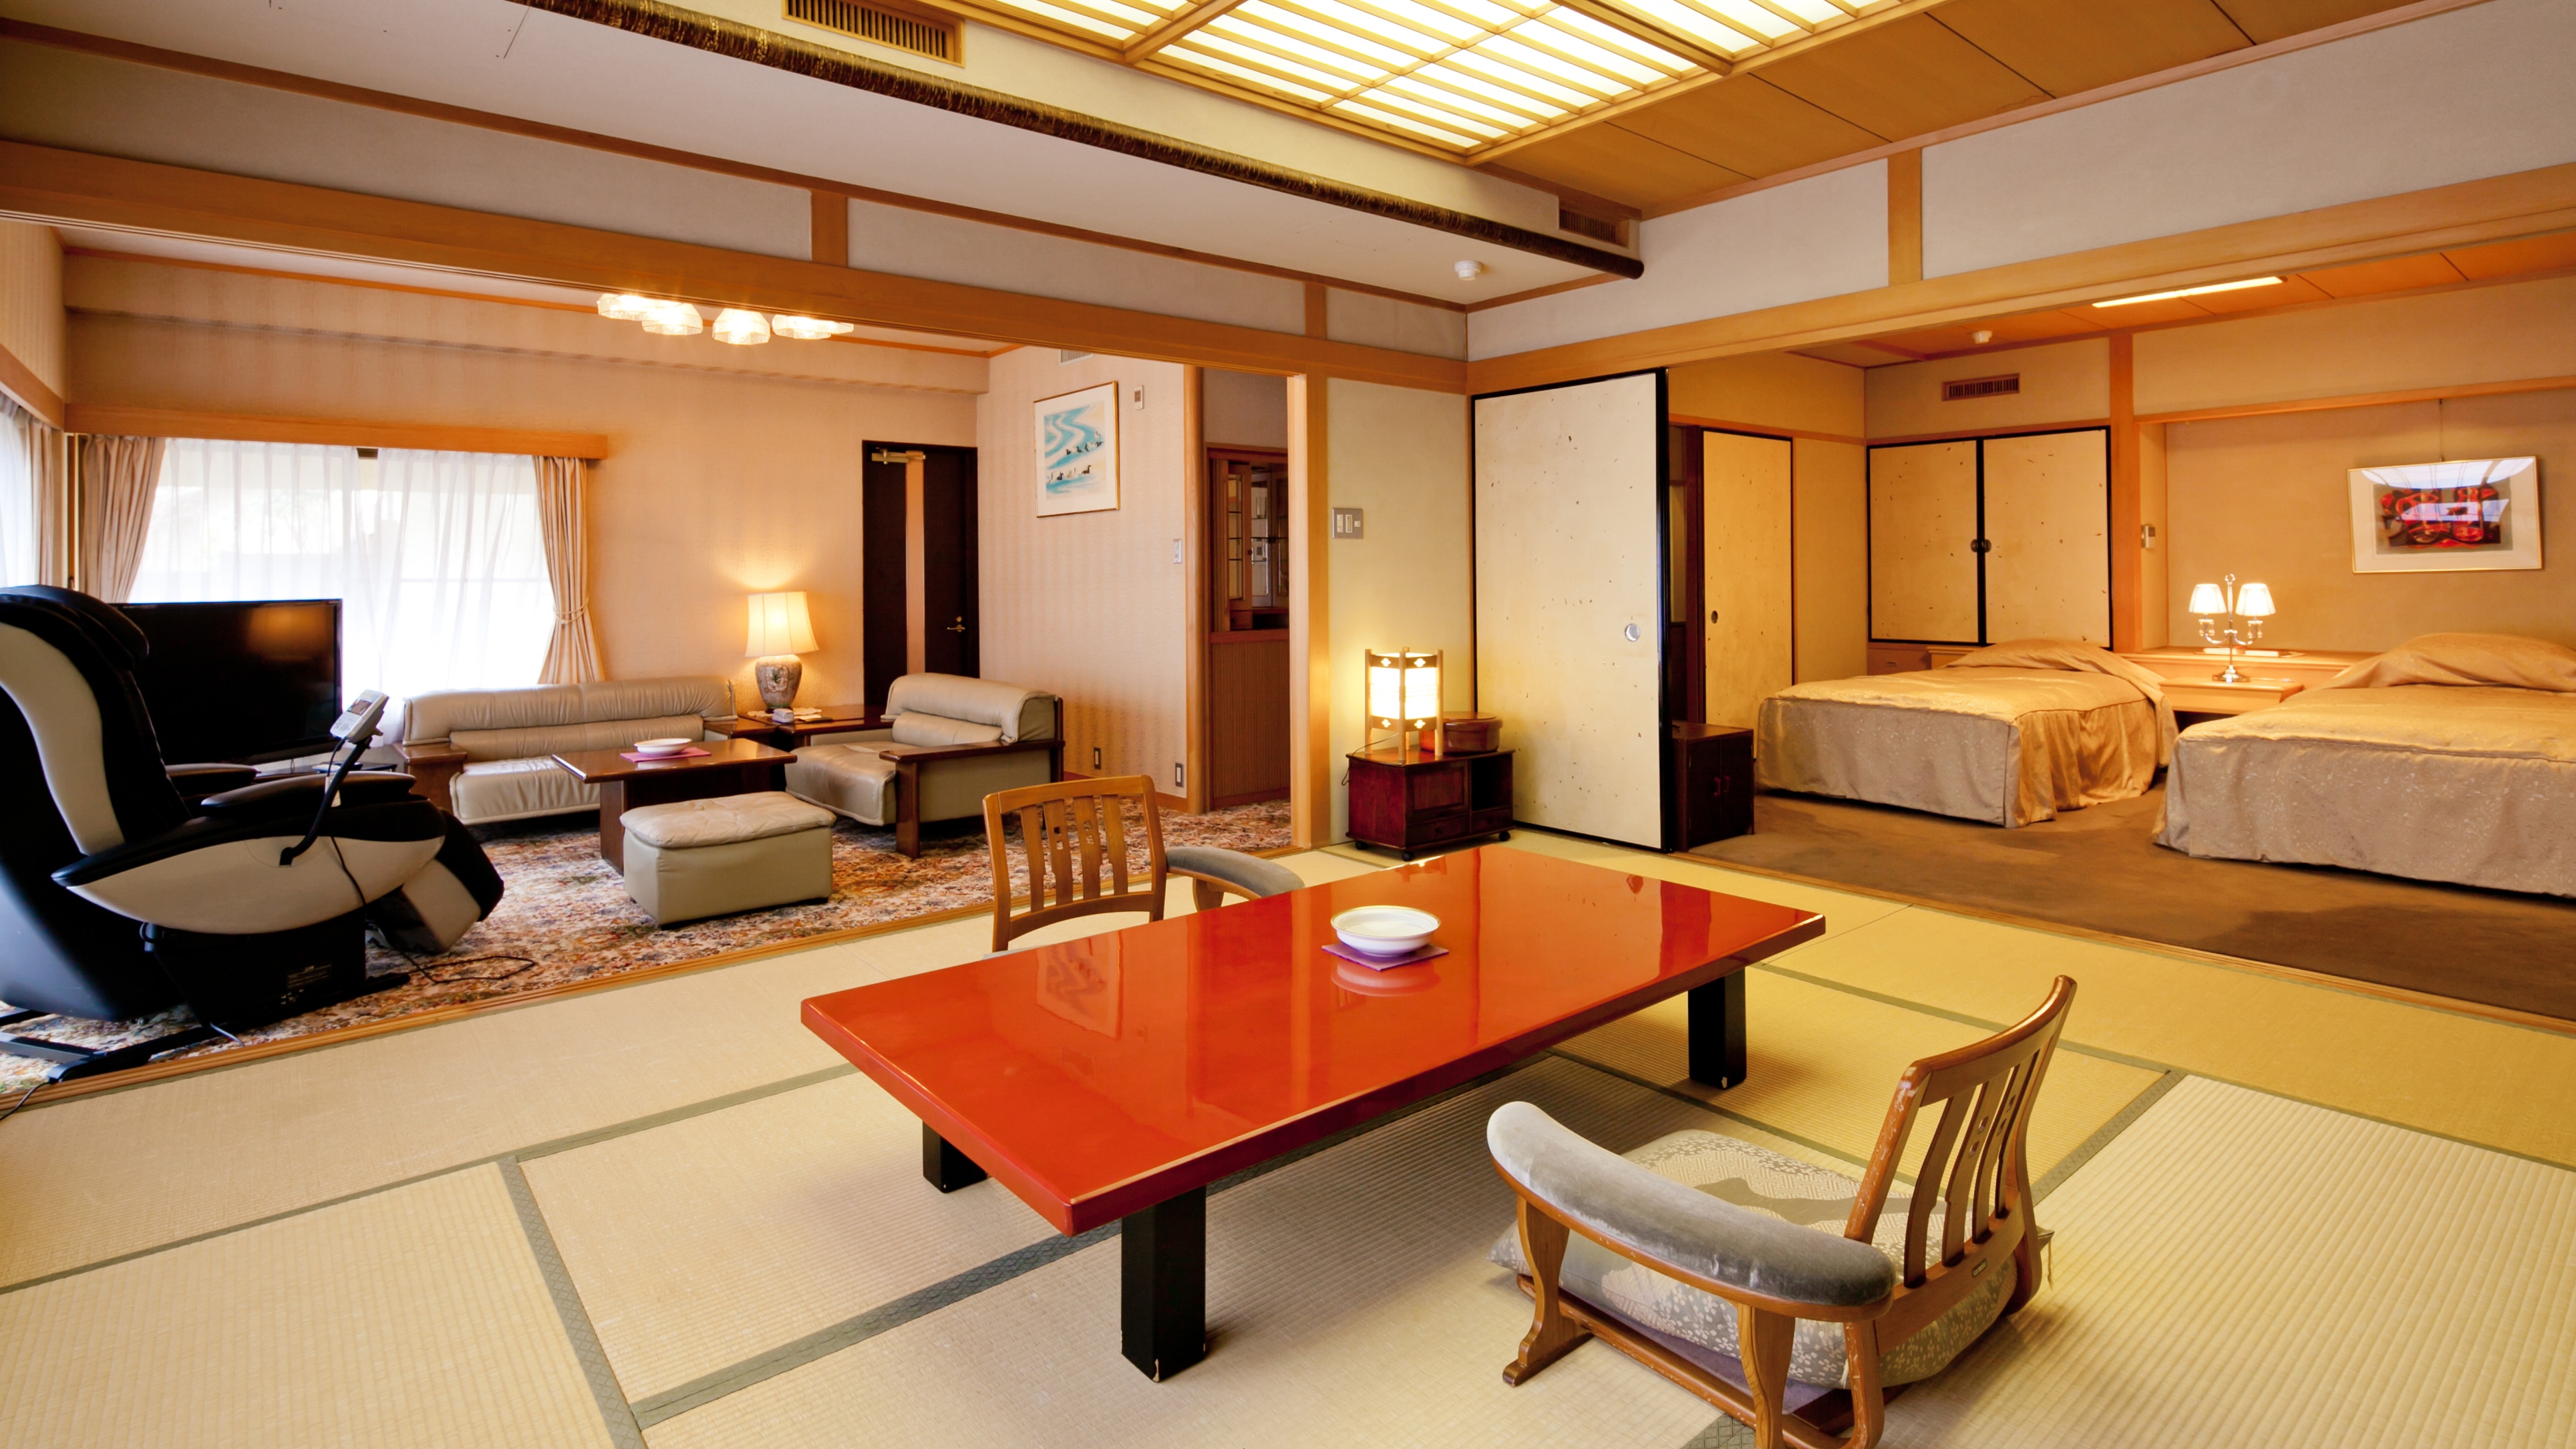 With open-air bath ◆ VIP room Gokusuitei-Yugao- ◆ Japanese-Western style room (10 tatami mats) and Western-style room (8.8 tatami mats).